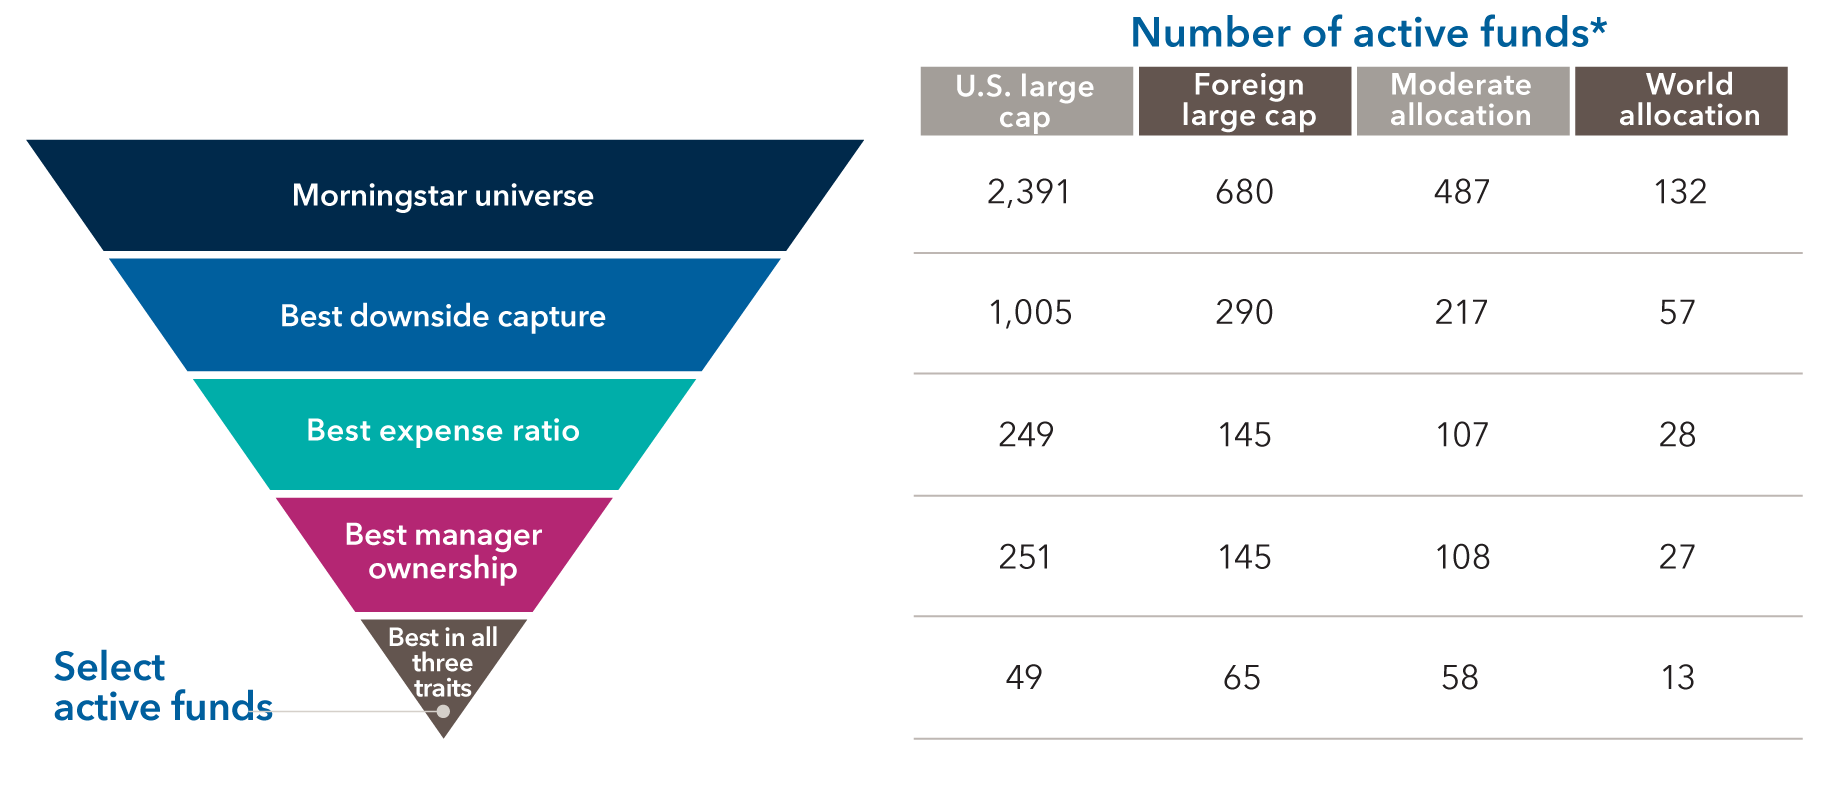 The chart shows an inverted triangle on the left with five categories of funds: Morningstar universe, Best downside capture, Best expense ratio, Best manager ownership and Best in all three traits. To the right of the triangle is a table showing the number of funds in each of those categories broken out by fund focus. Morningstar universe – U.S. large cap: 2,391; Foreign large cap: 680; Moderate allocation: 487 and World allocation: 132. Best downside capture – U.S. large cap: 1,005; Foreign large cap: 290; Moderate allocation: 217 and World allocation: 57. Best expense ratio  – U.S. large cap: 249; Foreign large cap: 145; Moderate allocation: 107 and World allocation: 28. Best manager ownership – U.S. large cap: 251; Foreign large cap: 145; Moderate allocation: 108 and World allocation: 27. Best in all three traits  – U.S. large cap: 49; Foreign large cap: 65; Moderate allocation: 58 and World allocation: 13.